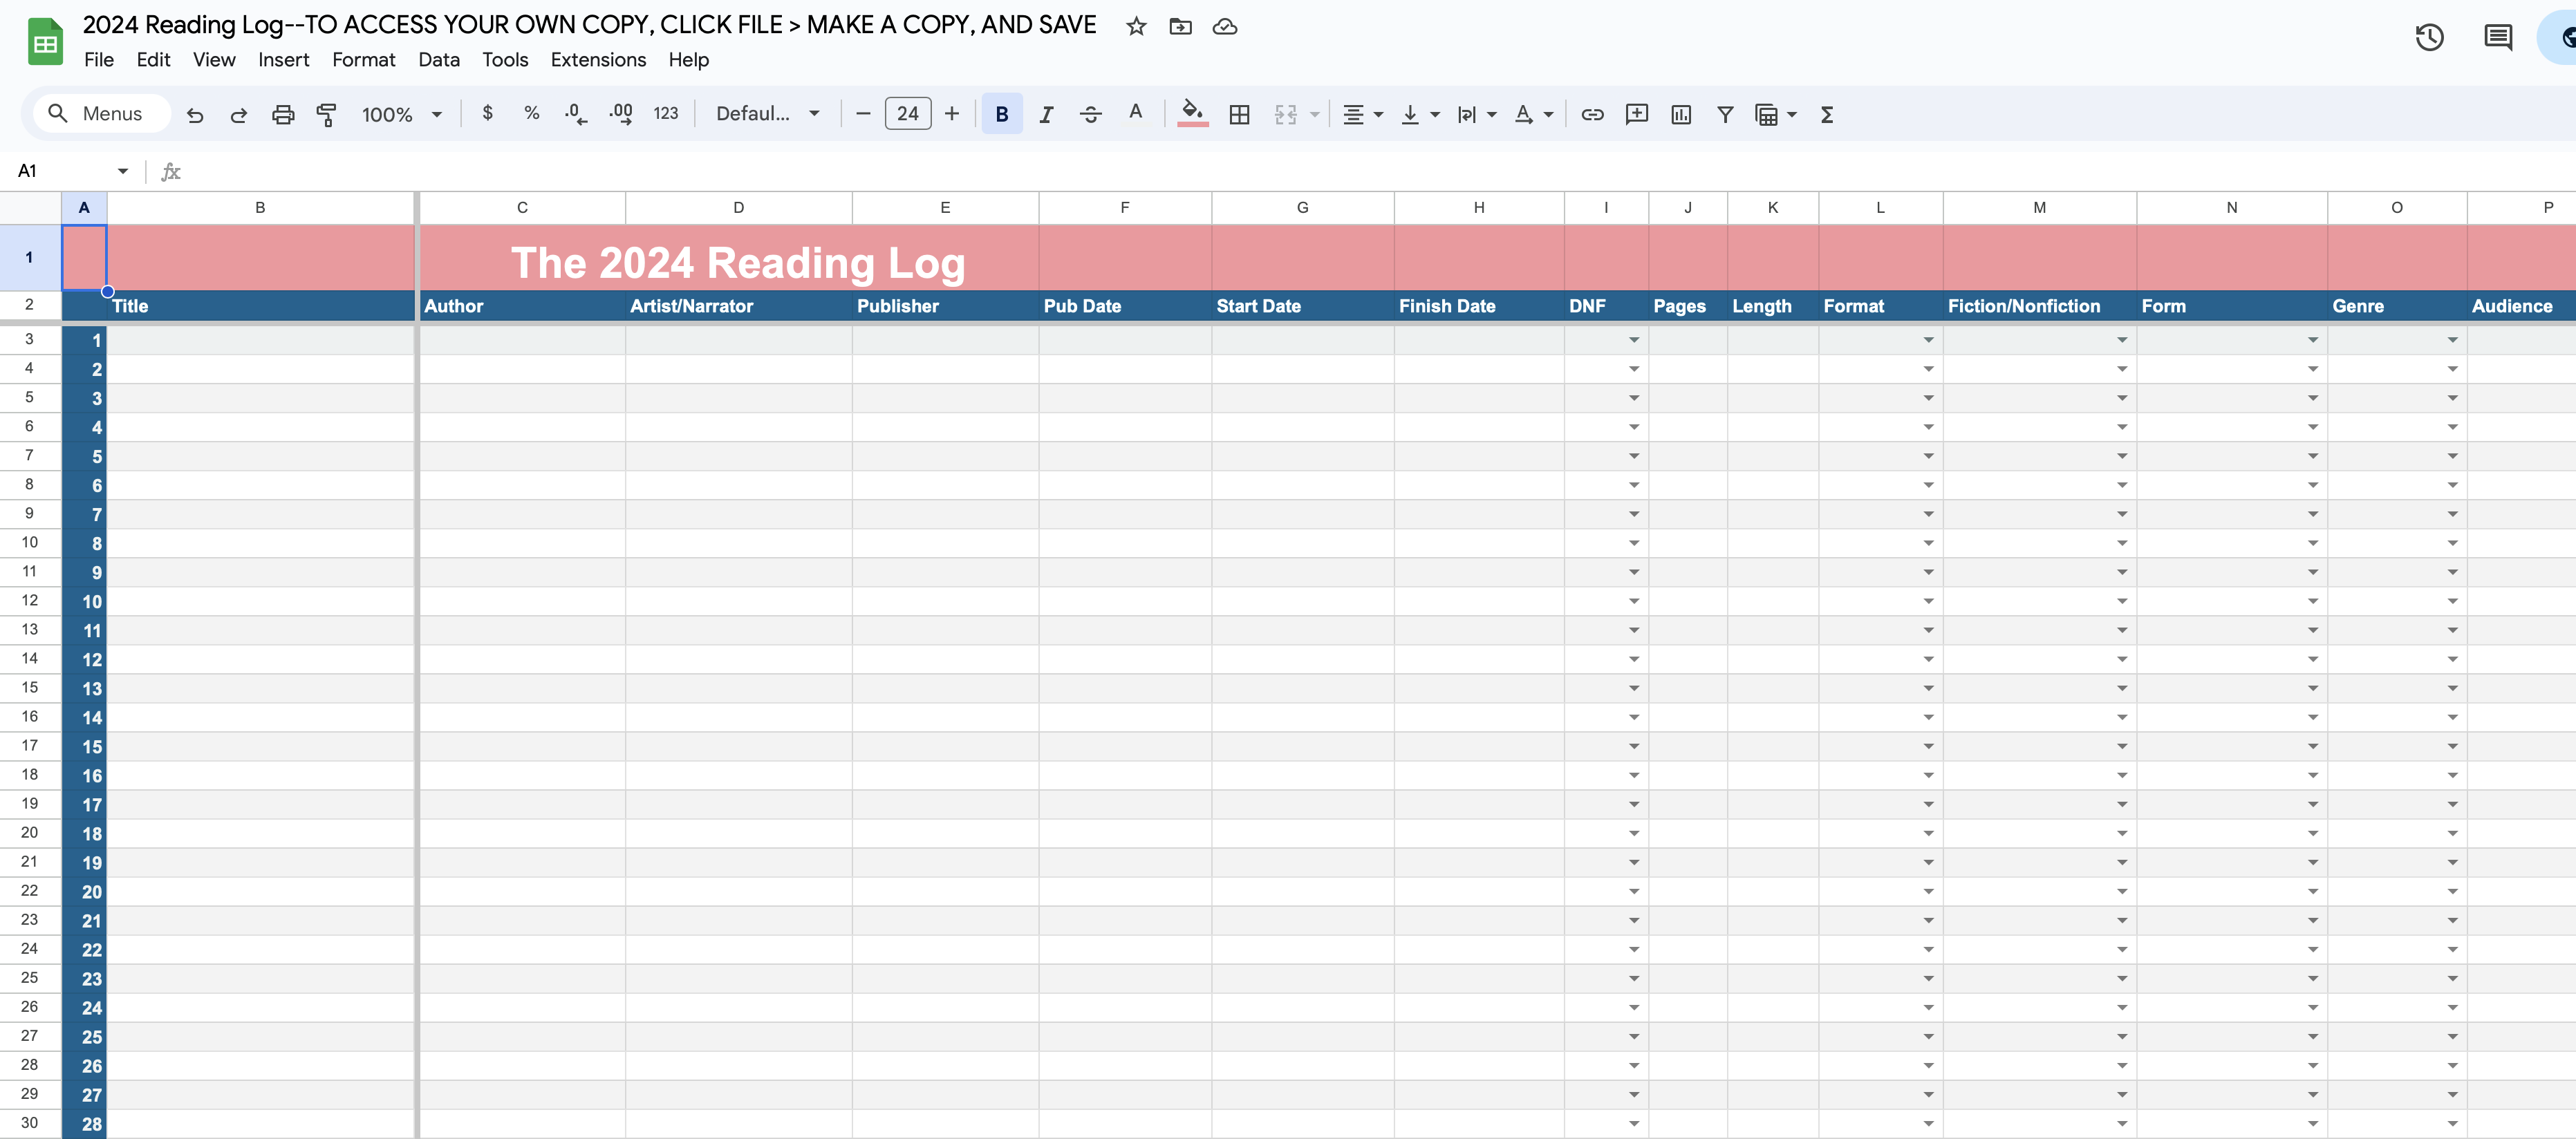 a screenshot of the 2024 reading log, a Google Sheets based spreadsheet for tracking reading